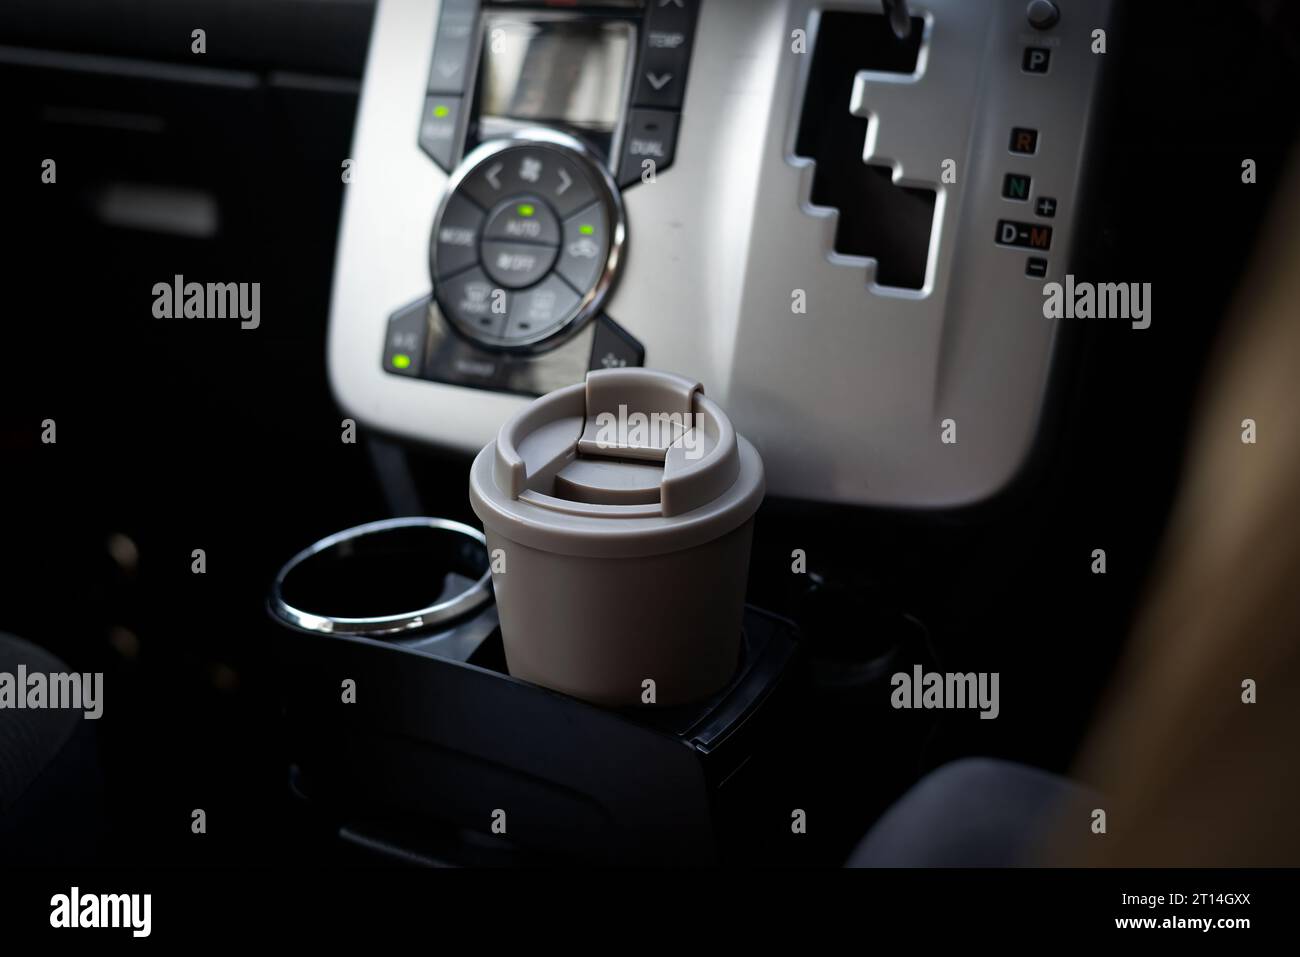 https://c8.alamy.com/comp/2T14GXX/a-travel-coffee-mug-or-tumbler-in-a-car-cup-holder-on-the-drivers-seat-2T14GXX.jpg